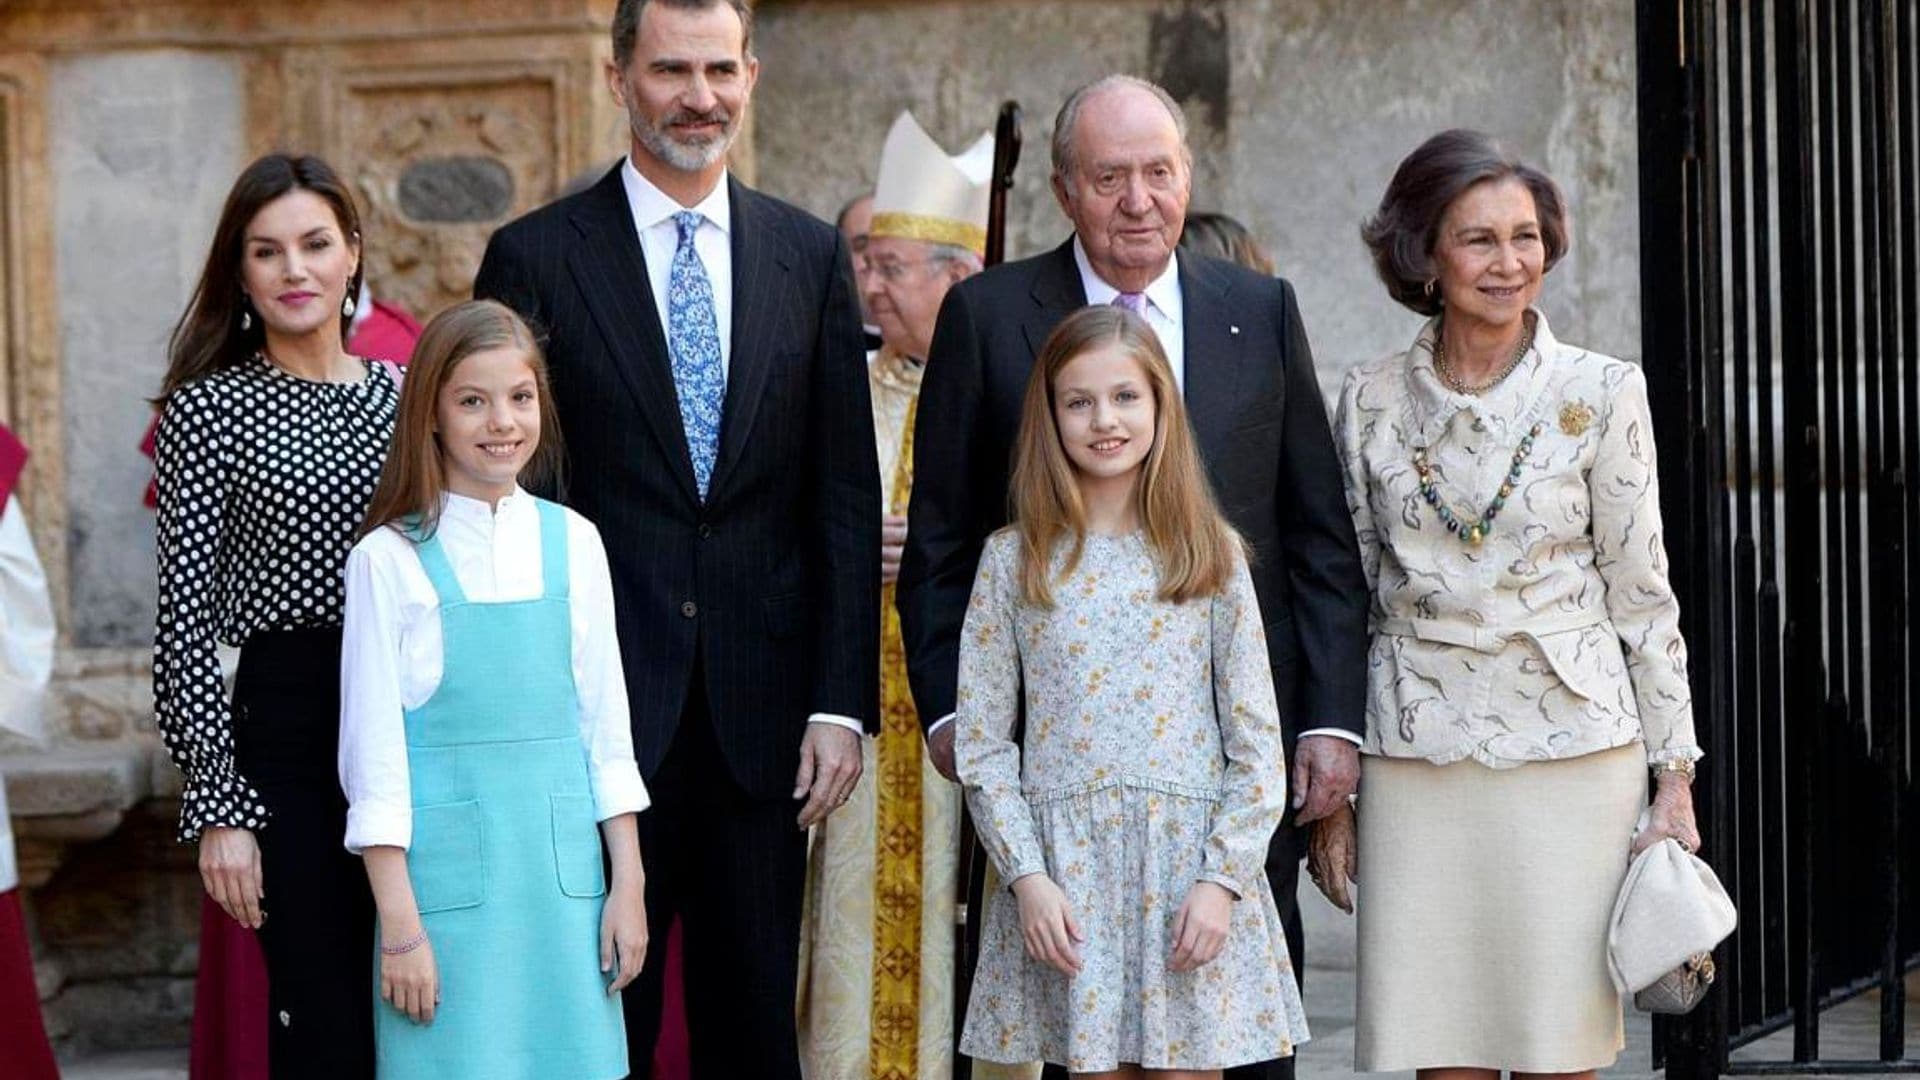 King Felipe of Spain's father announces he is leaving Spain amid financial scandal